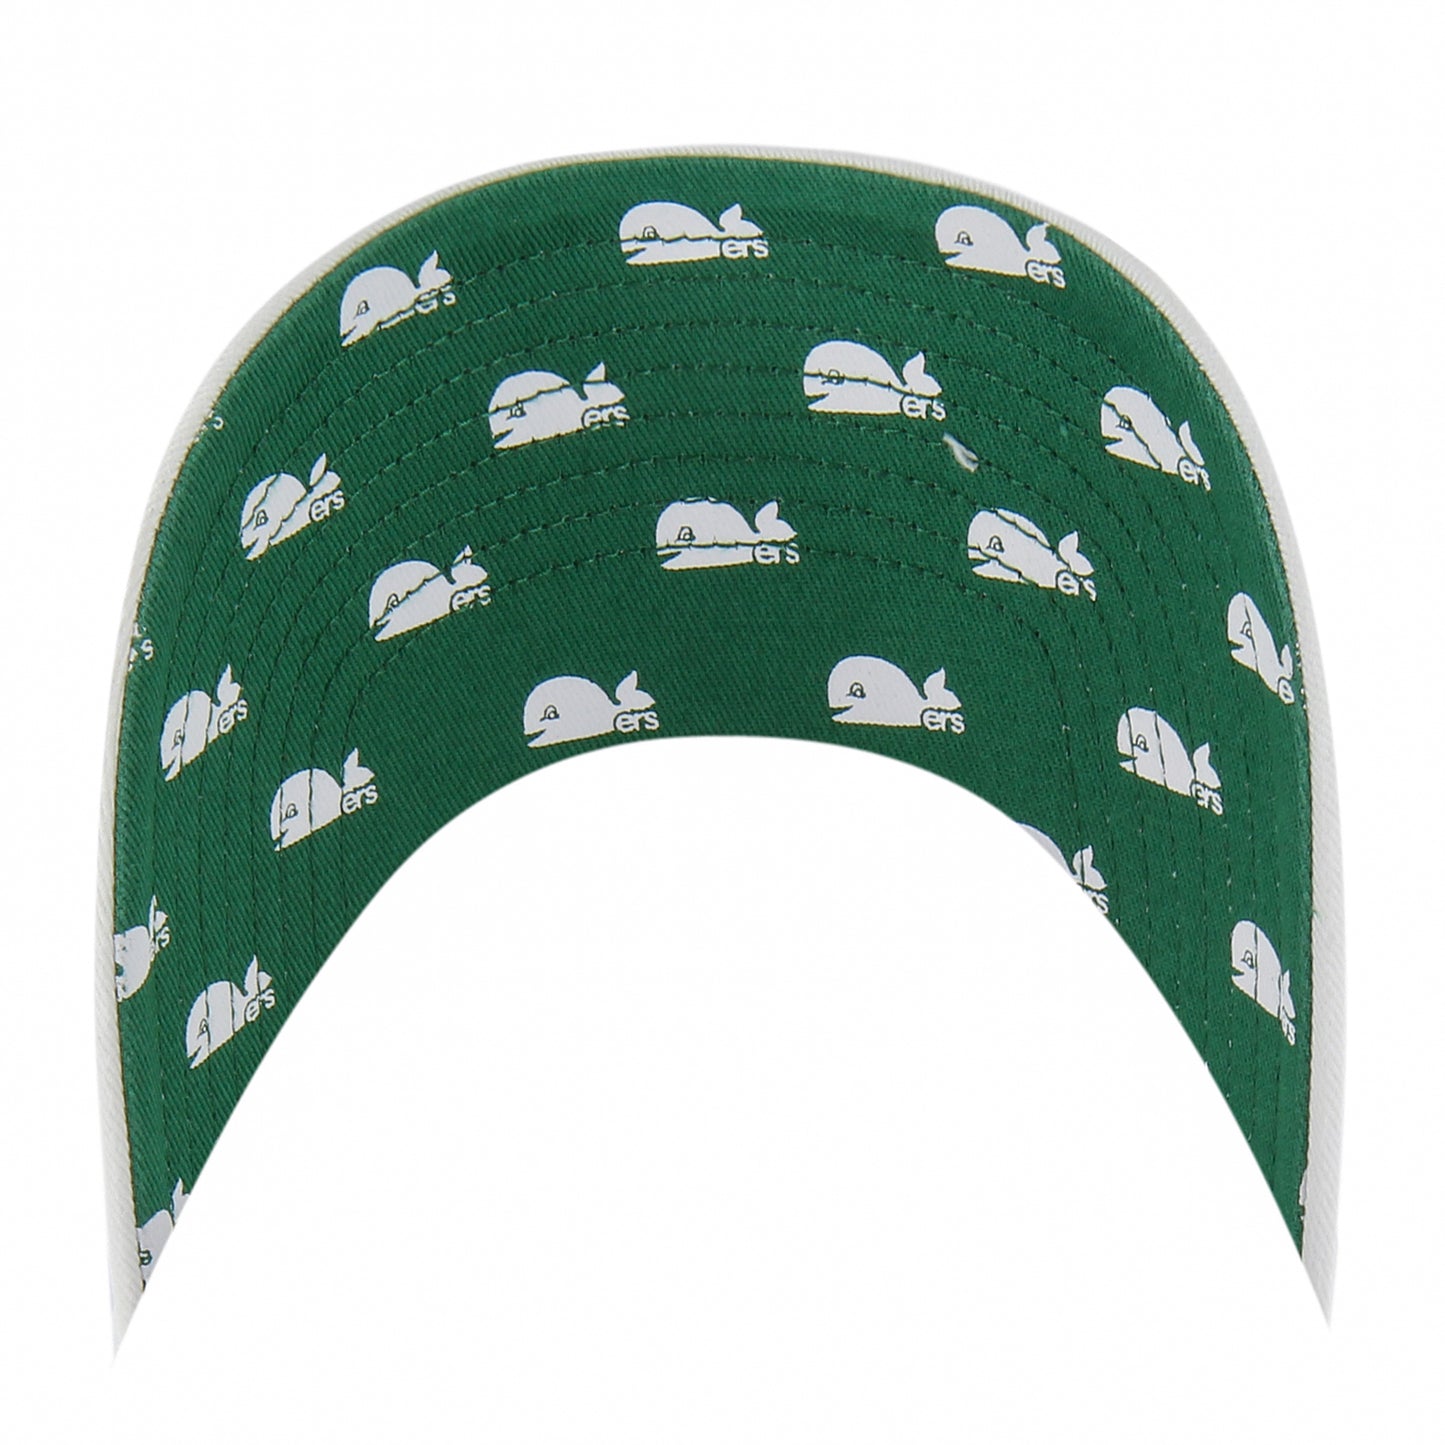 Bottom View: Green bill with a White Pucky logo scattered on it. 